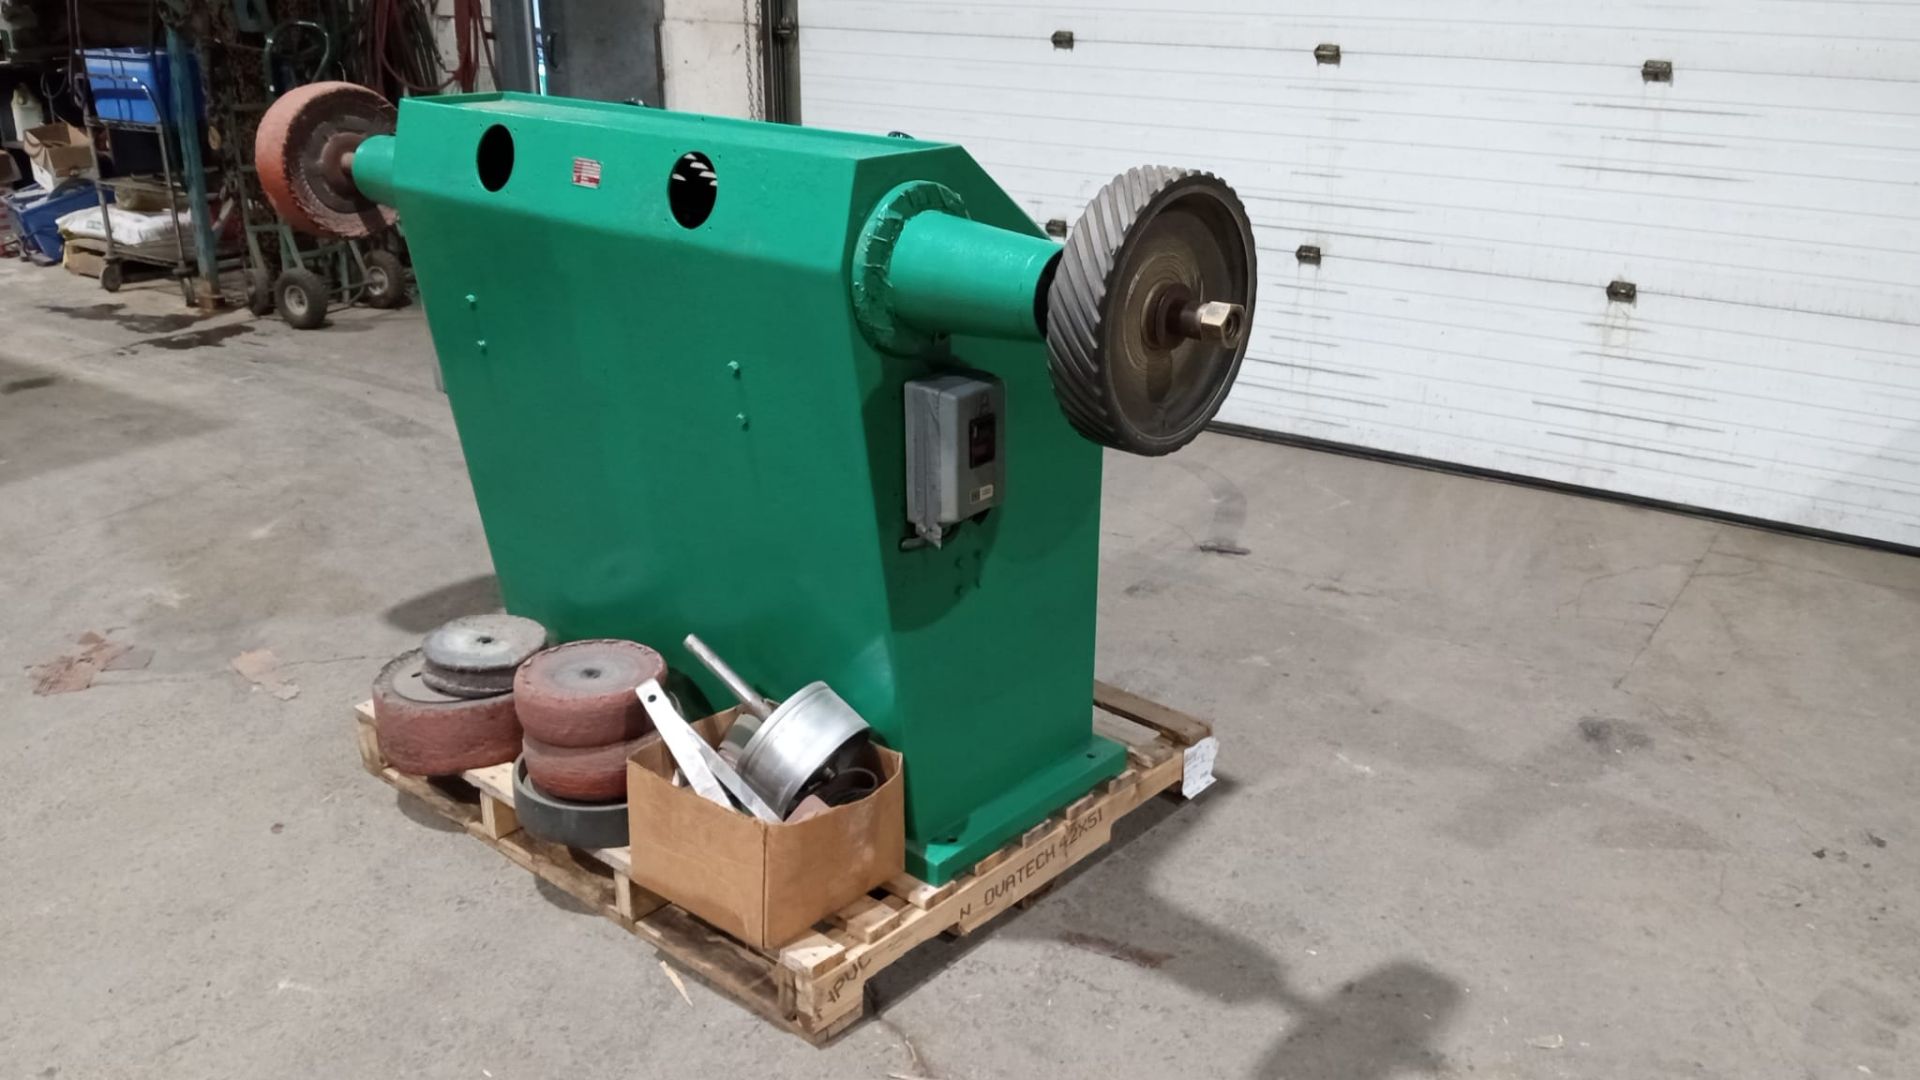 Poliec-Schleifmachine Industrial Double Ended Polisher Buffer Unit with Extra Dies and attachments - Image 2 of 5